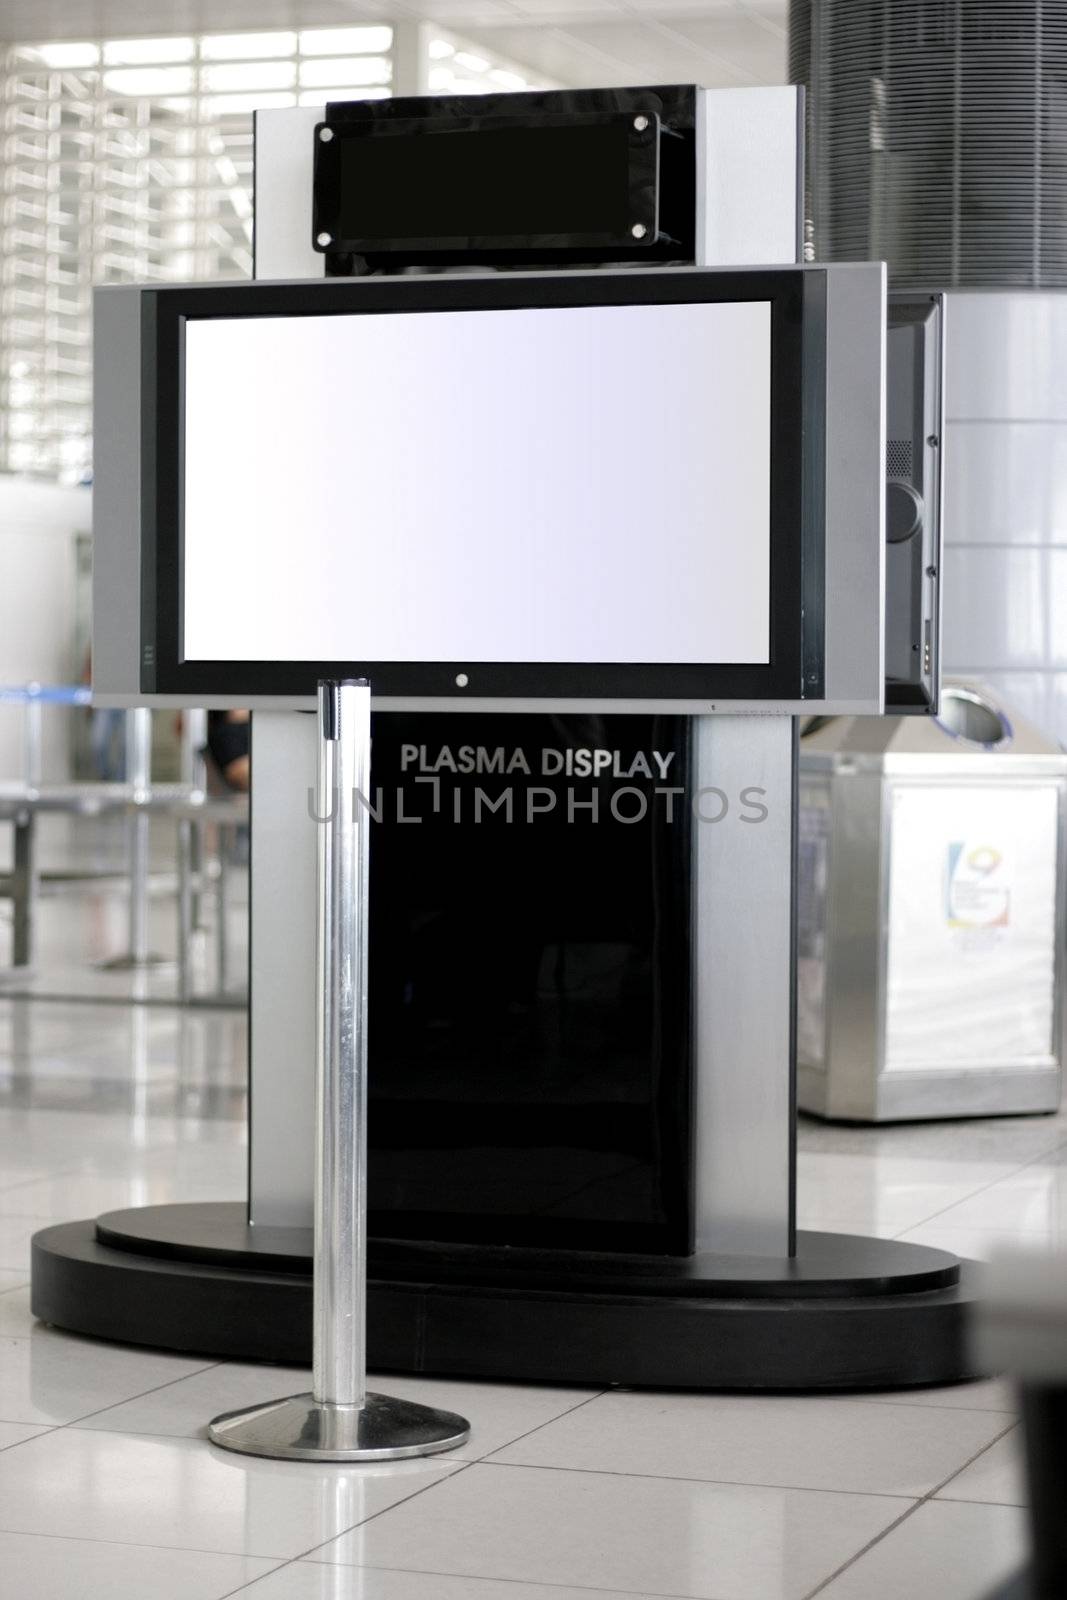 LCD Plasma Television as display in an airport